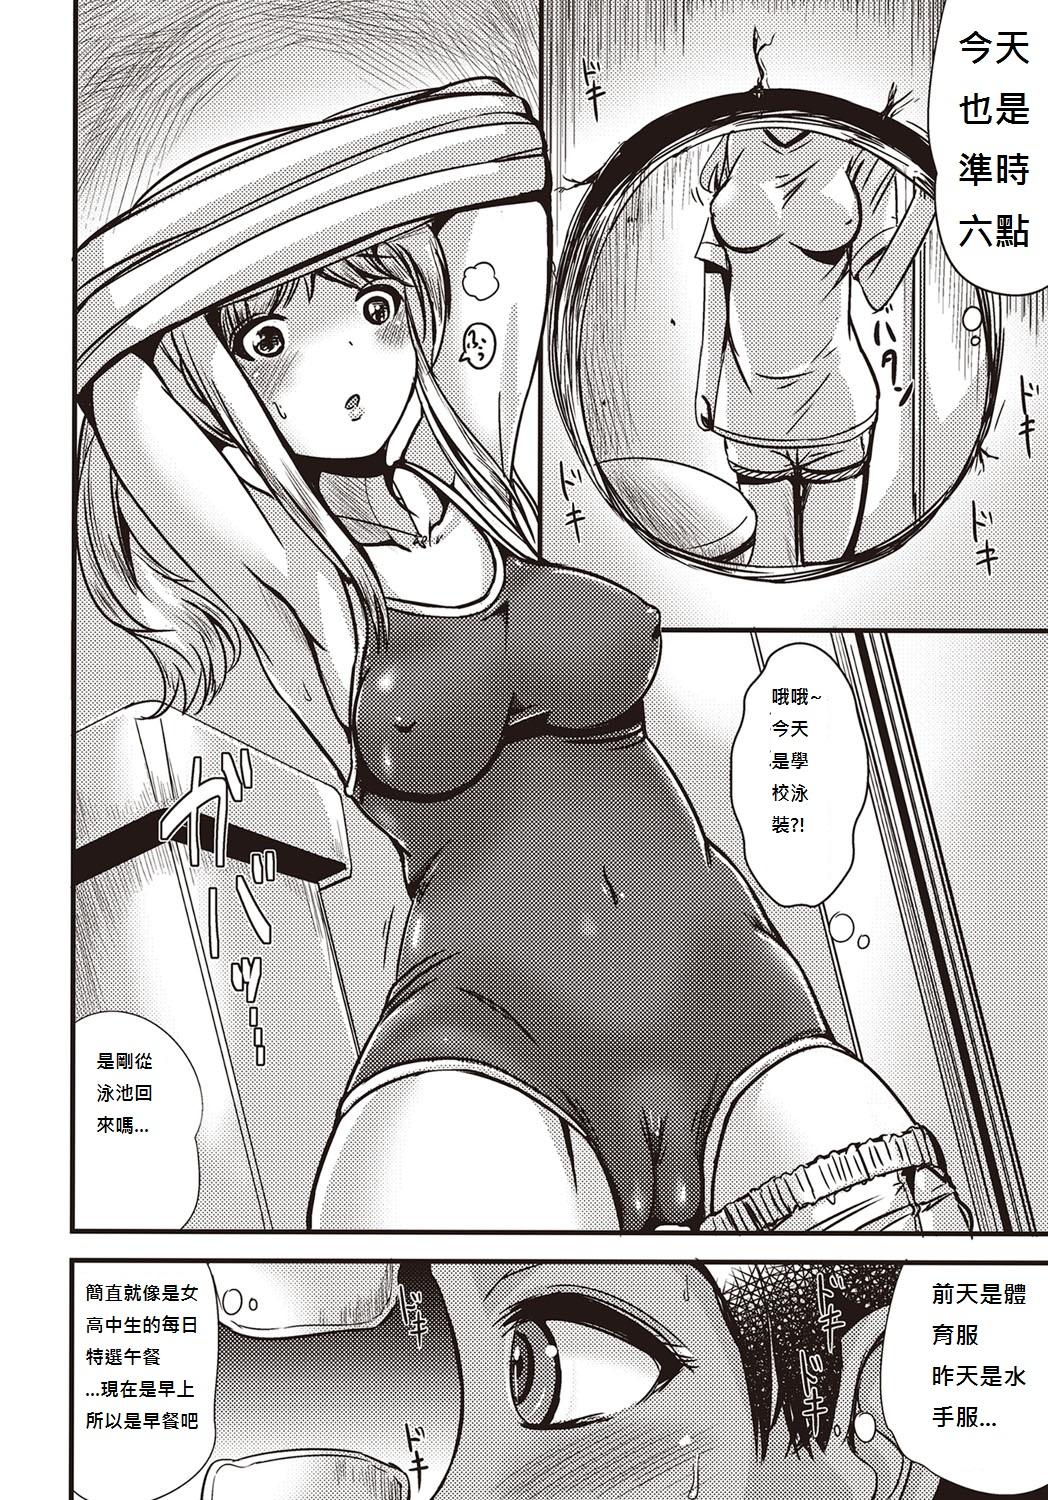 Gays Chishoujo Suit Relax - Page 2